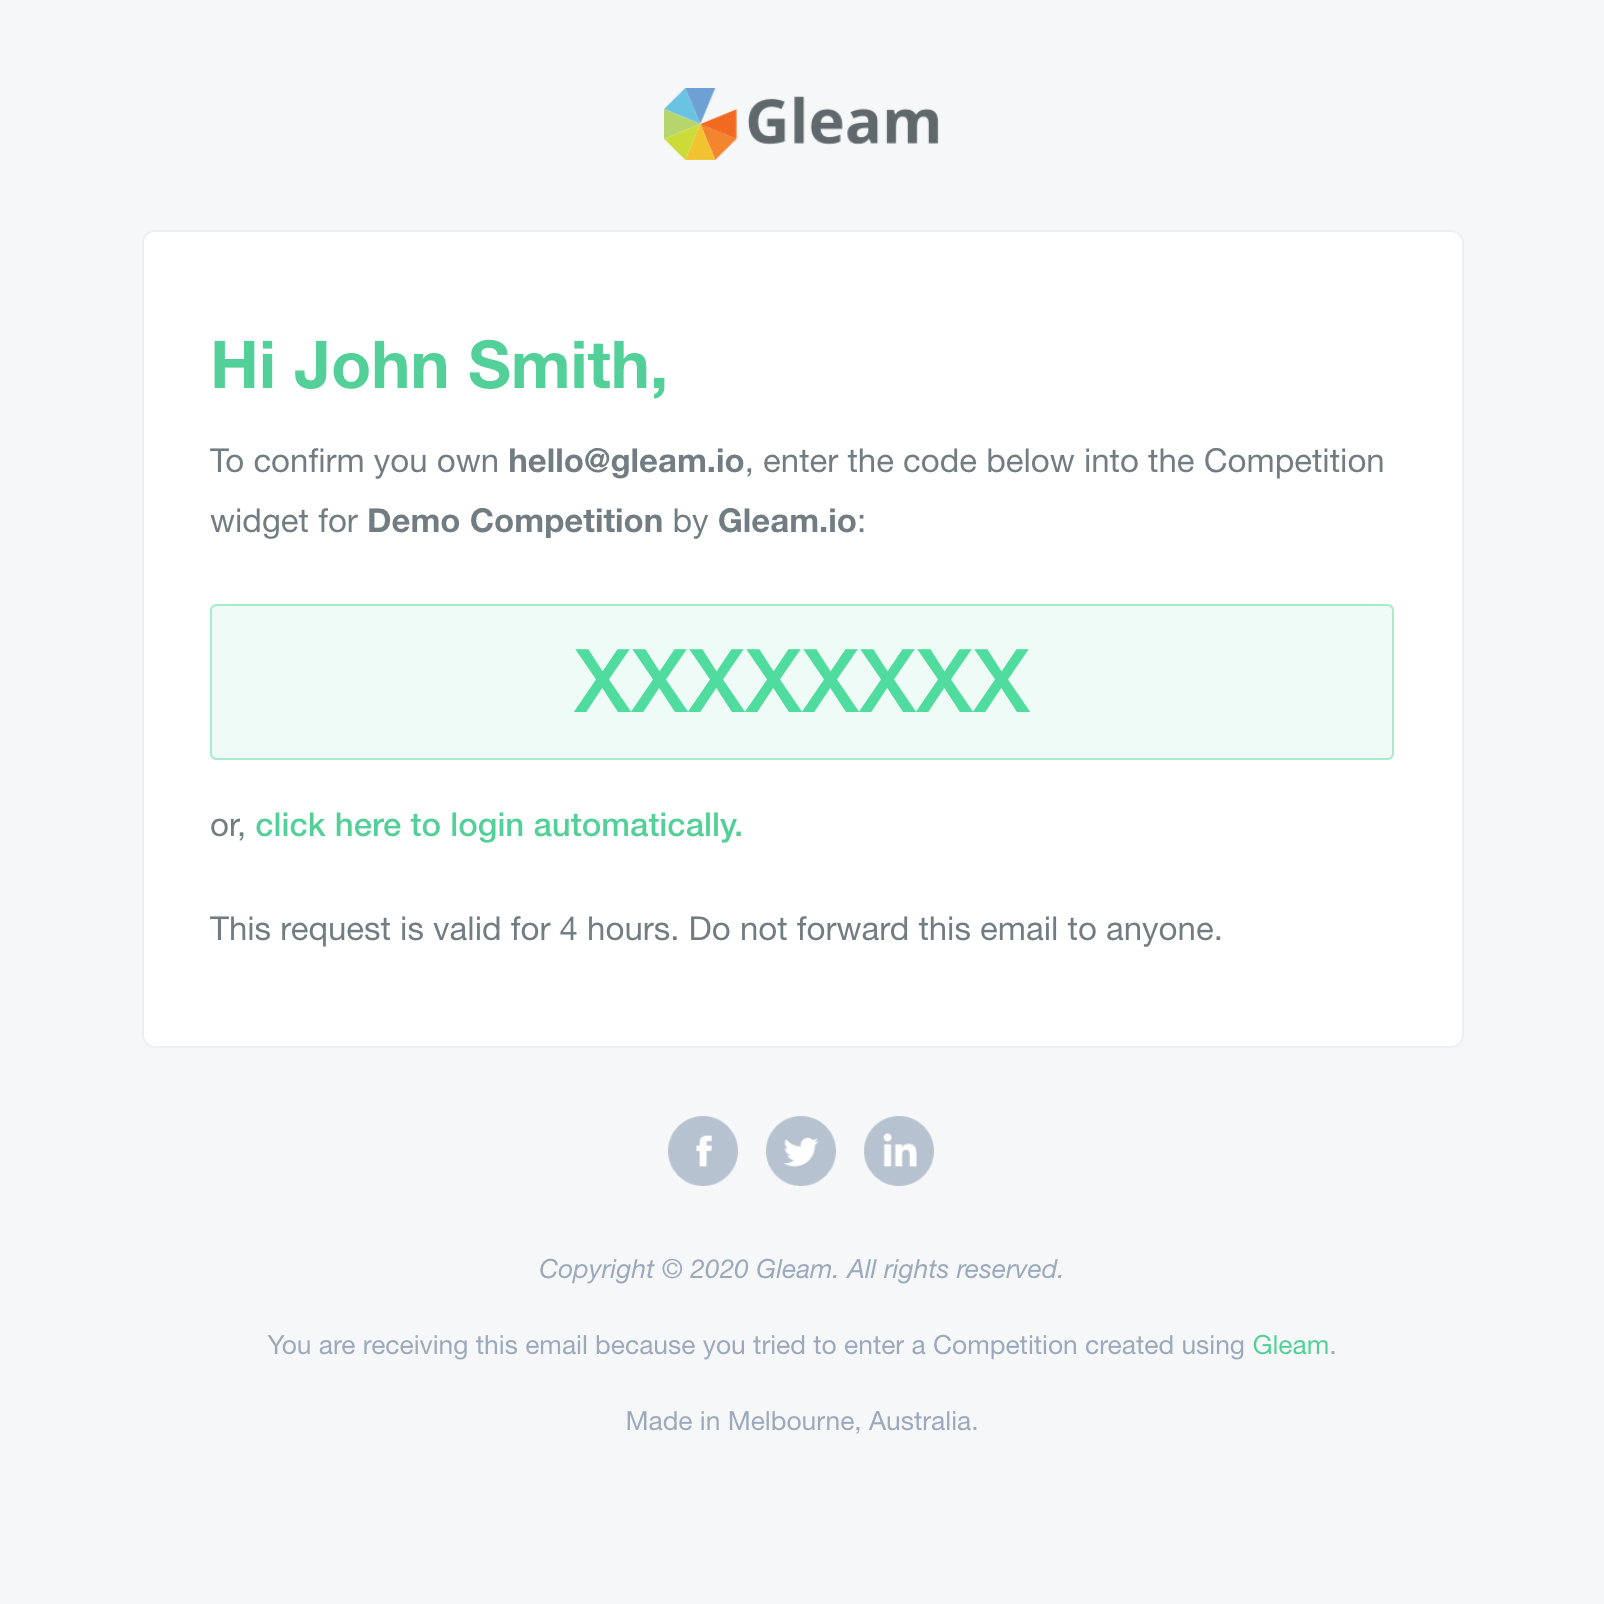 Gleam email showing recovery code